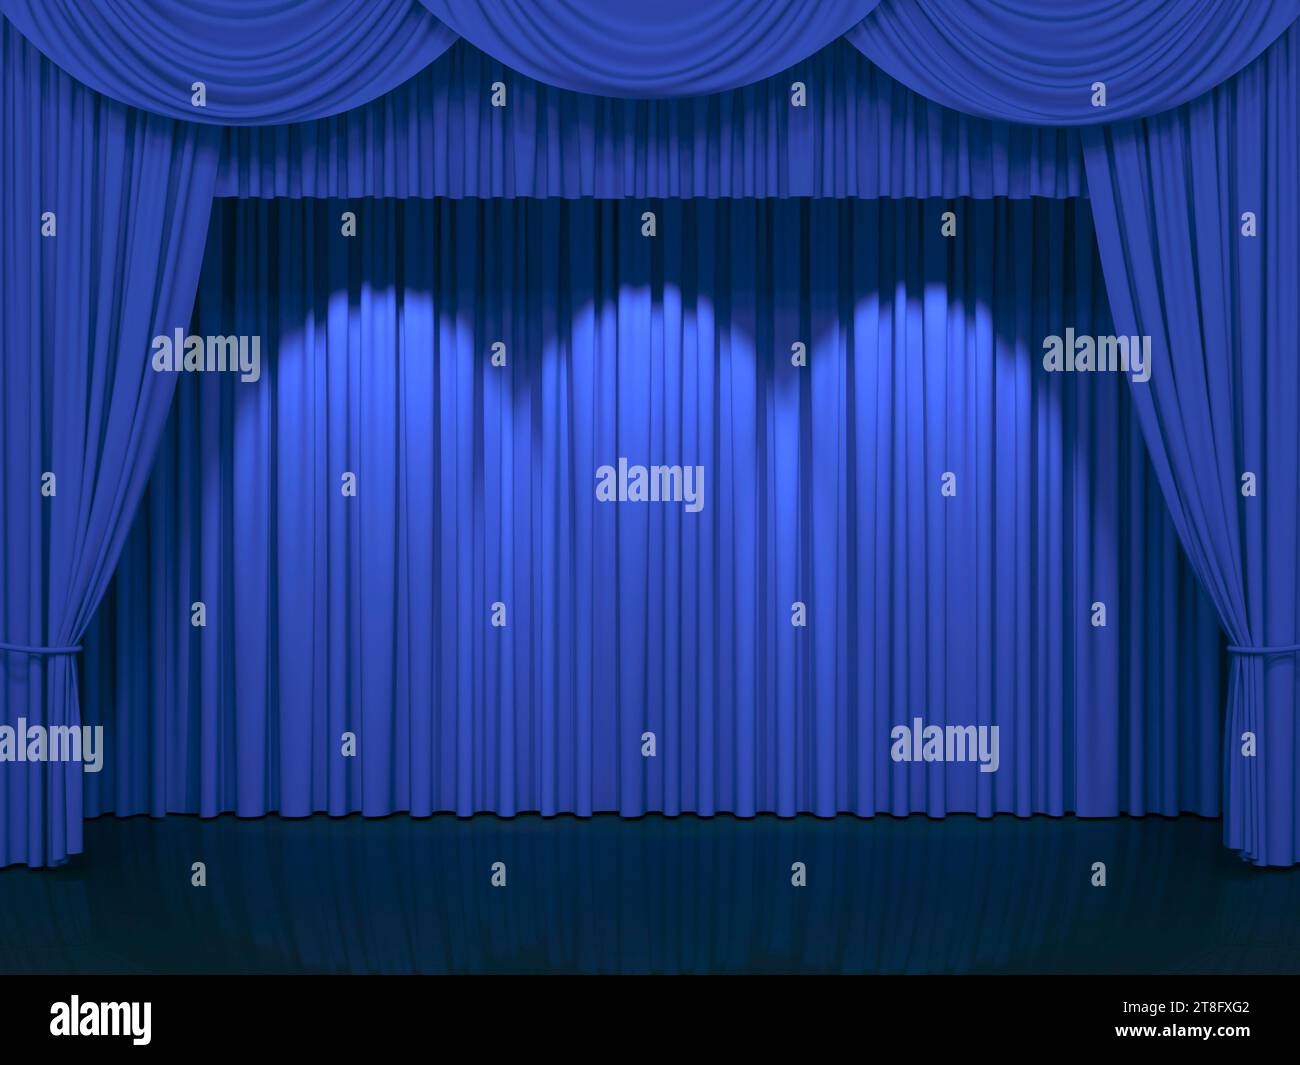 Luxury silk stage or window curtains. Interior design, waiting for show, movie end, revealing new product, premiere, marketing concept. 3D illustratio Stock Photo